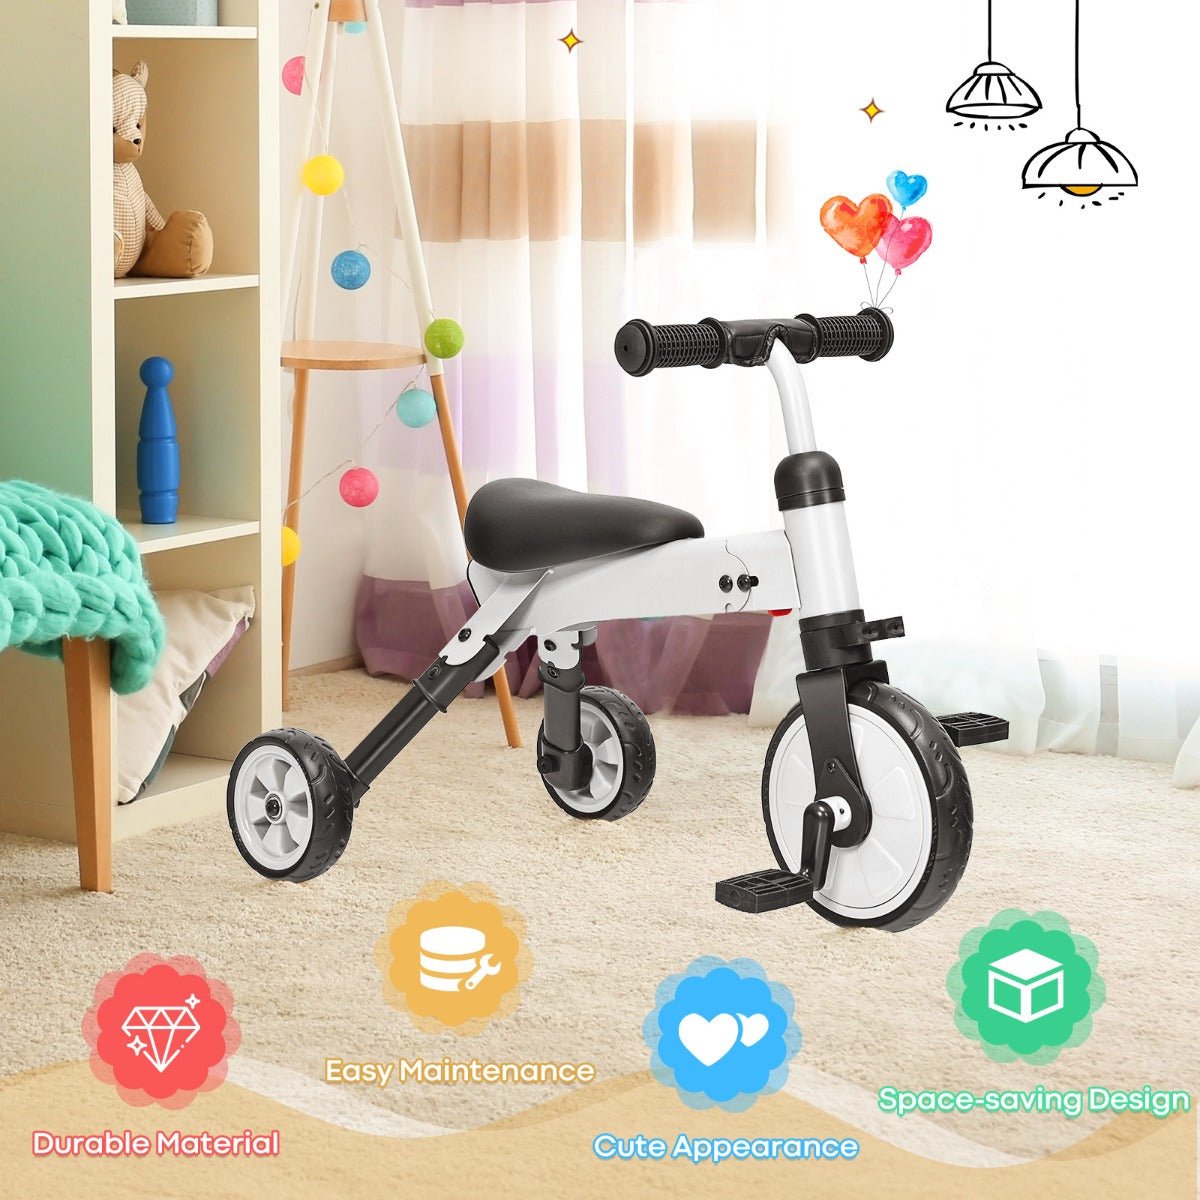 Exploring Freedom: 2-in-1 Trike with Detachable Pedals for Growing Toddlers